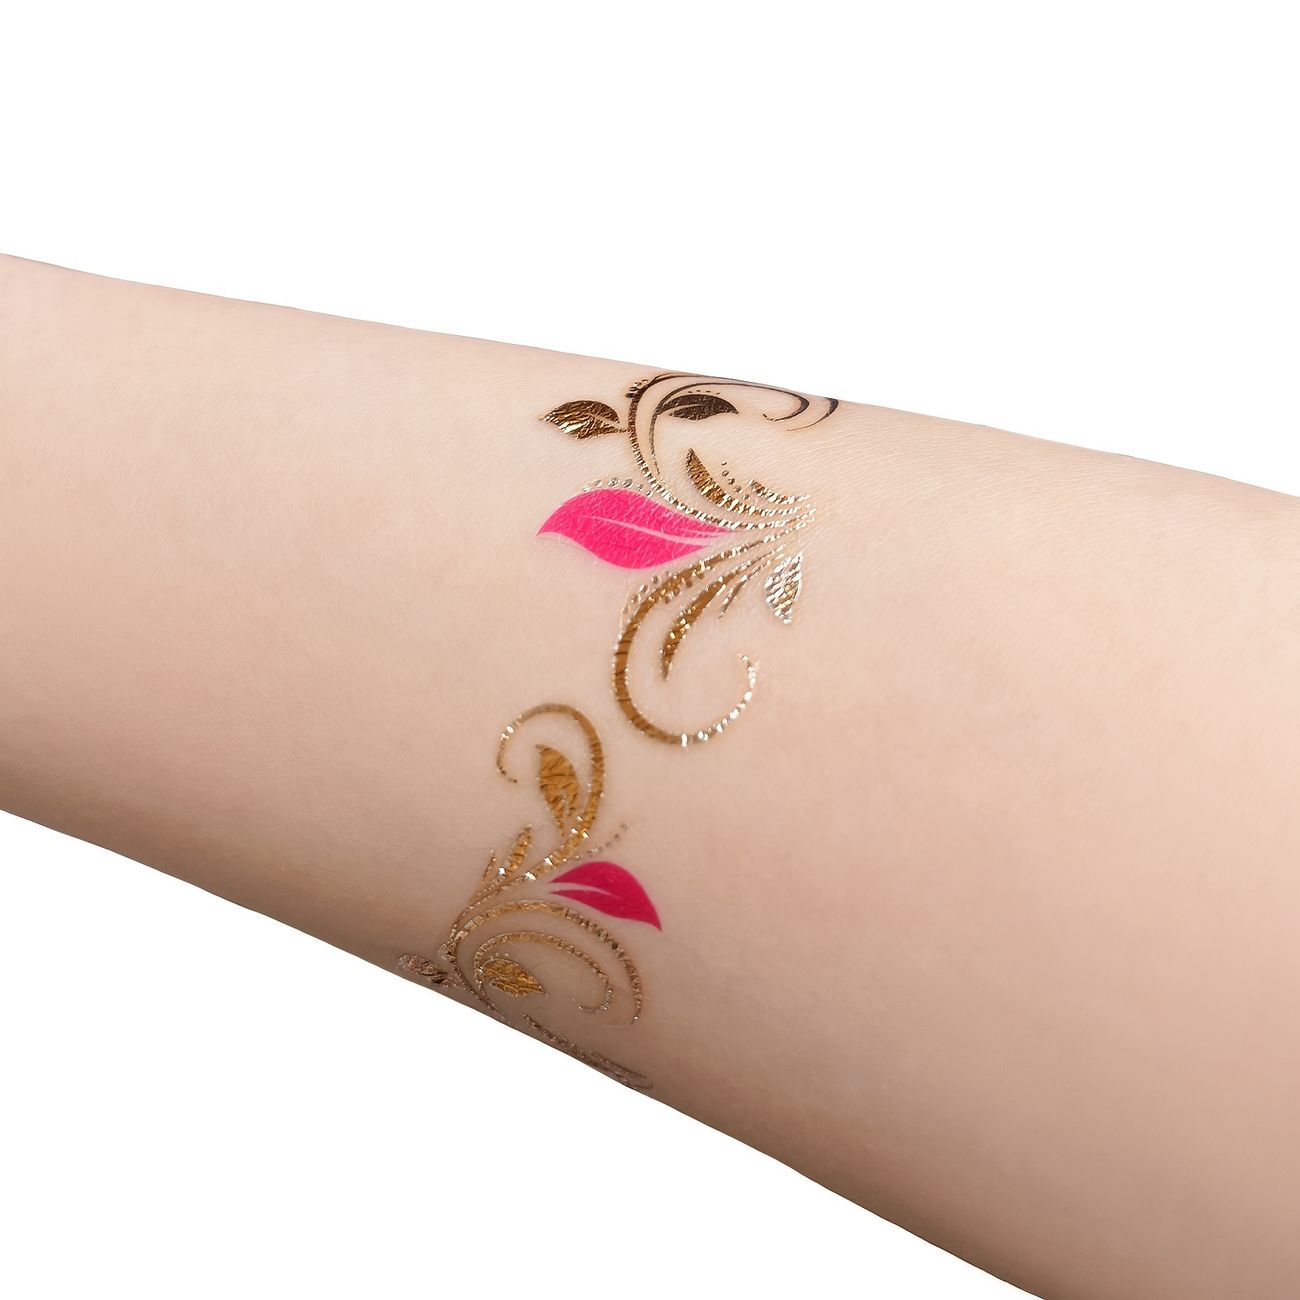 Metallic Temporary Tattoo Gold Silver Eye And Lips Floral Pattern Fake  Tattoos Flash Jewelry Tattoos Waterproof And Long Lasting Boho Style Tattoos  For Women And Girls | Free Shipping For New Users |